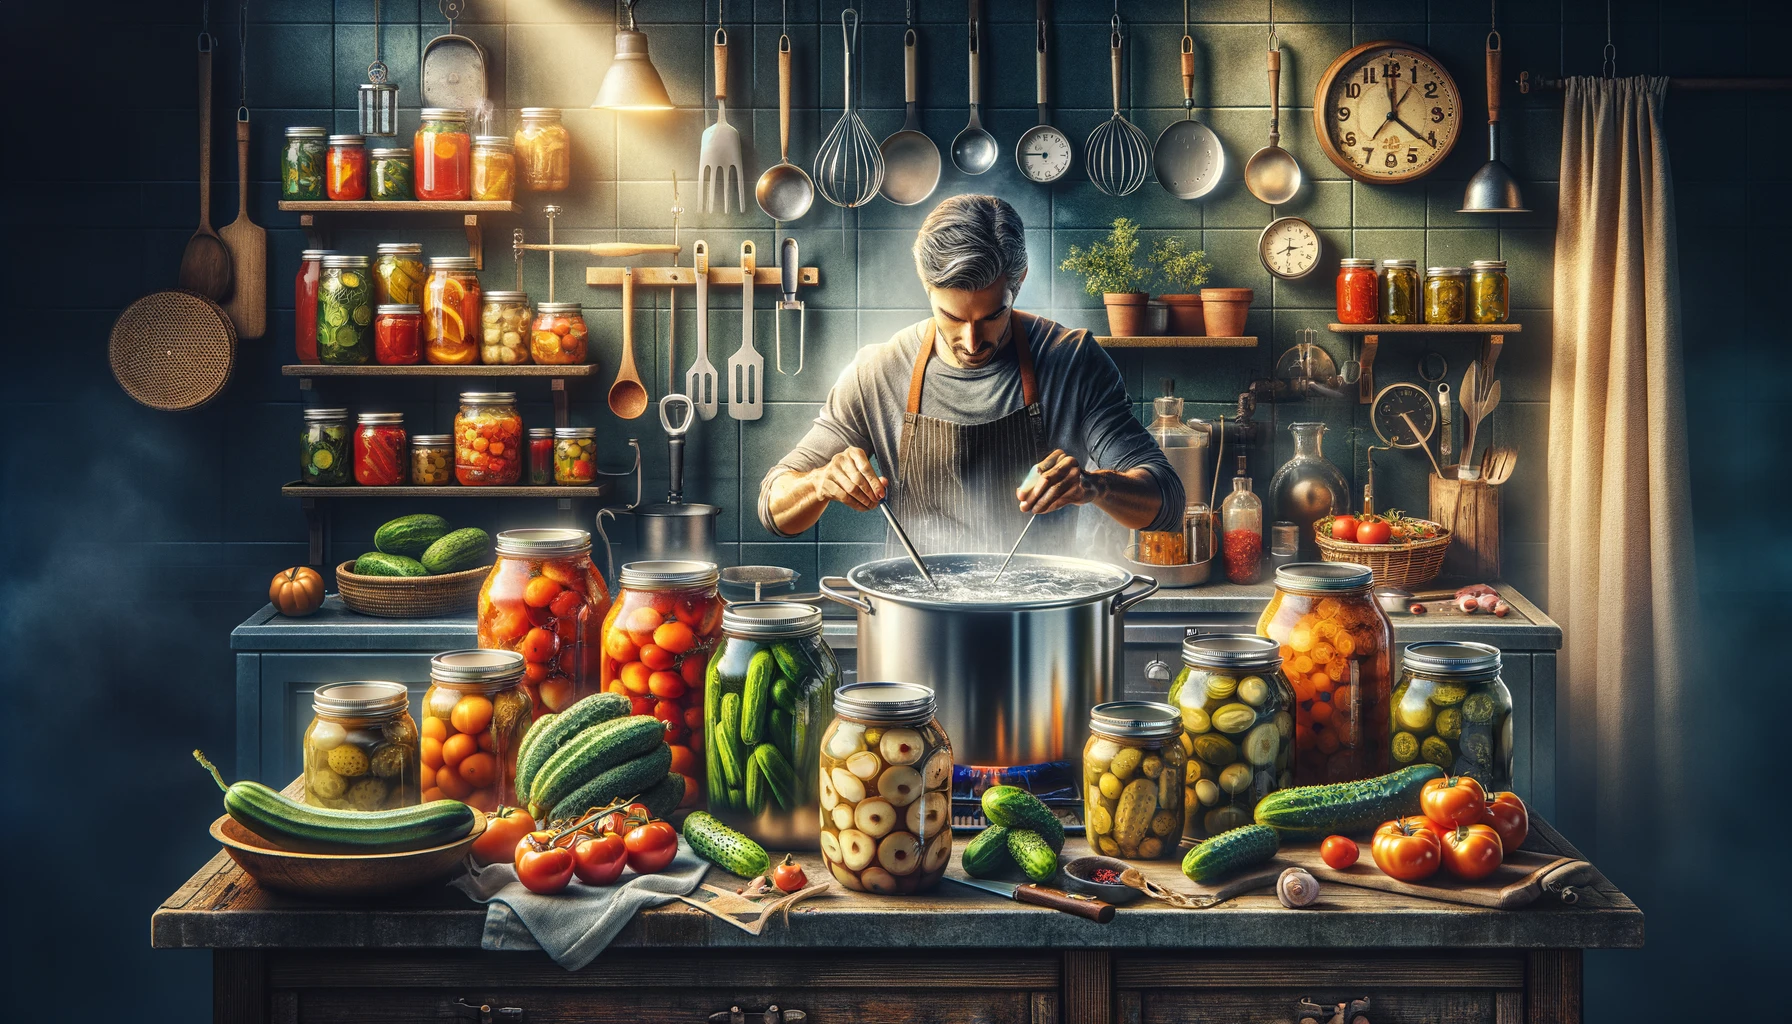 Experienced prepper using water bath canning to preserve high-acid foods like fruits and pickles in a kitchen, with a pot of boiling water and jars submerged, surrounded by colorful produce and essential canning tools, emphasizing the art and precision of home preservation